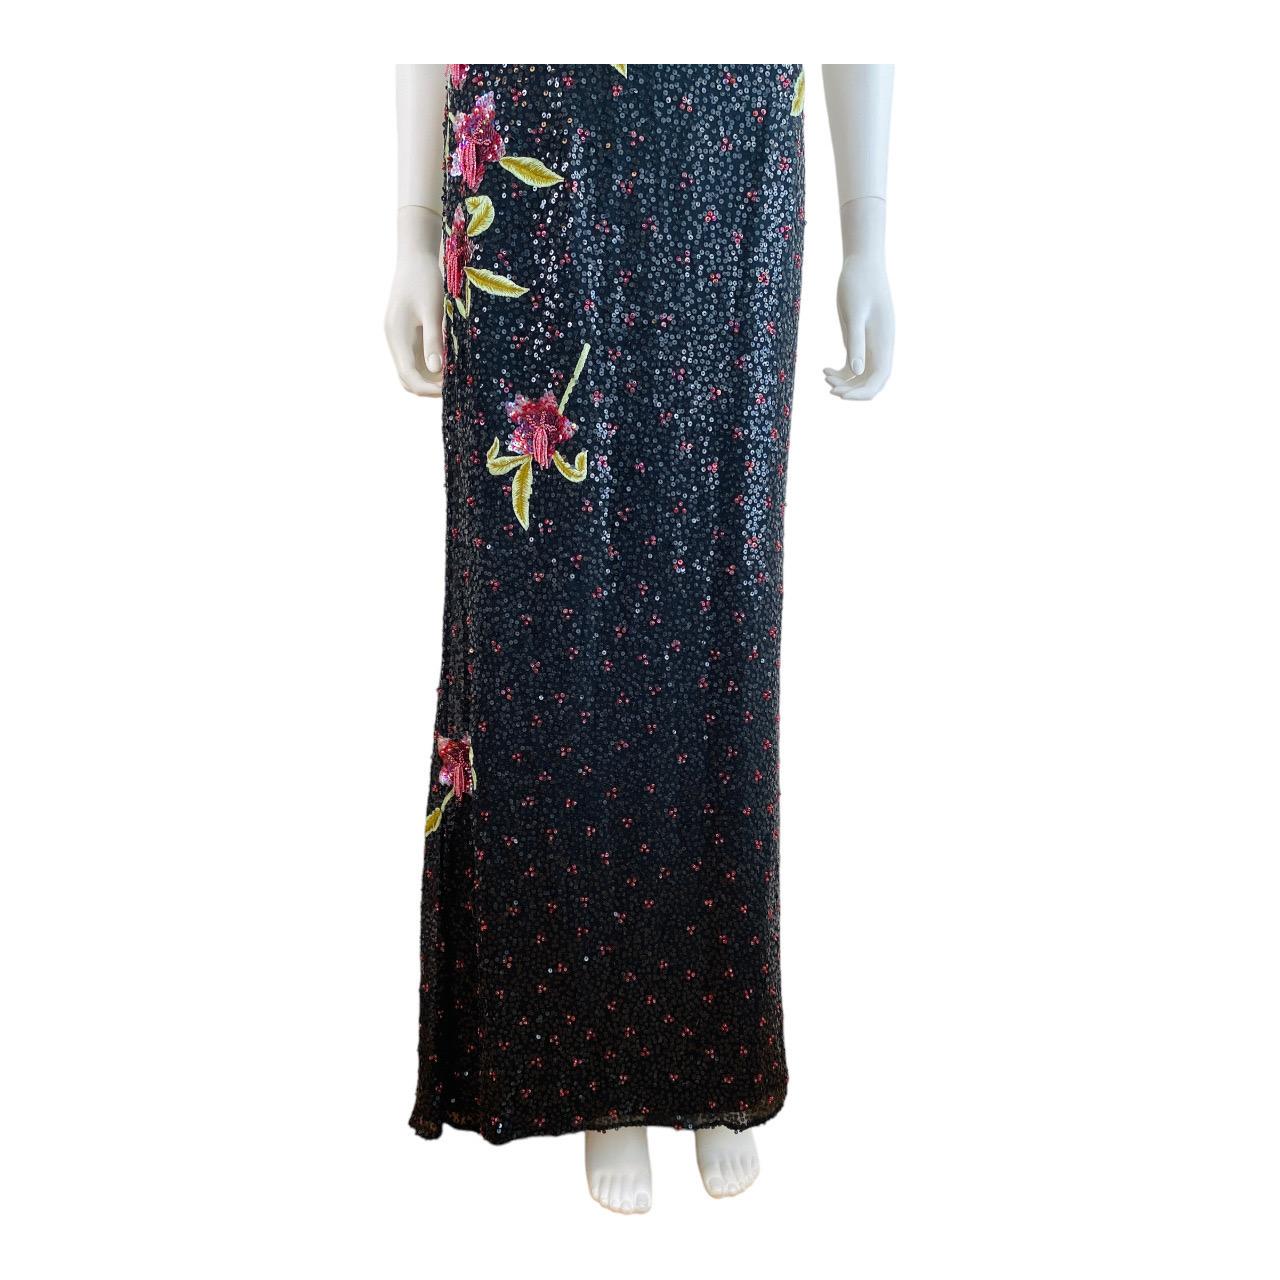 Vintage 2002 Escada Hand Beaded Sequin Floral Maxi Dress Gown Black Pink Flowers For Sale 1